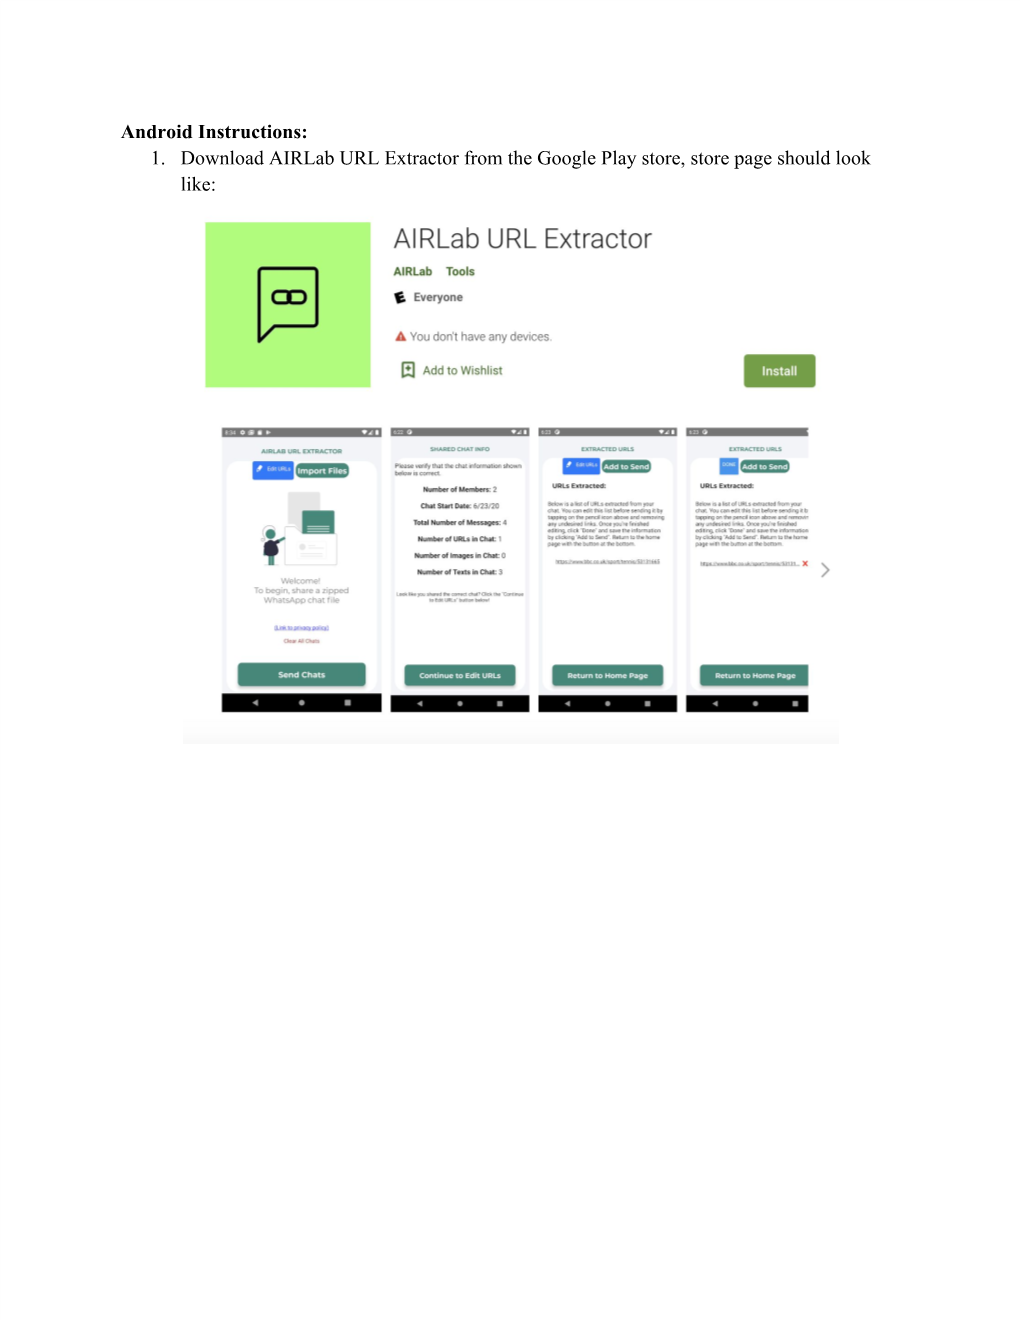 Android Instructions: 1. Download Airlab URL Extractor from the Google Play Store, Store Page Should Look Like